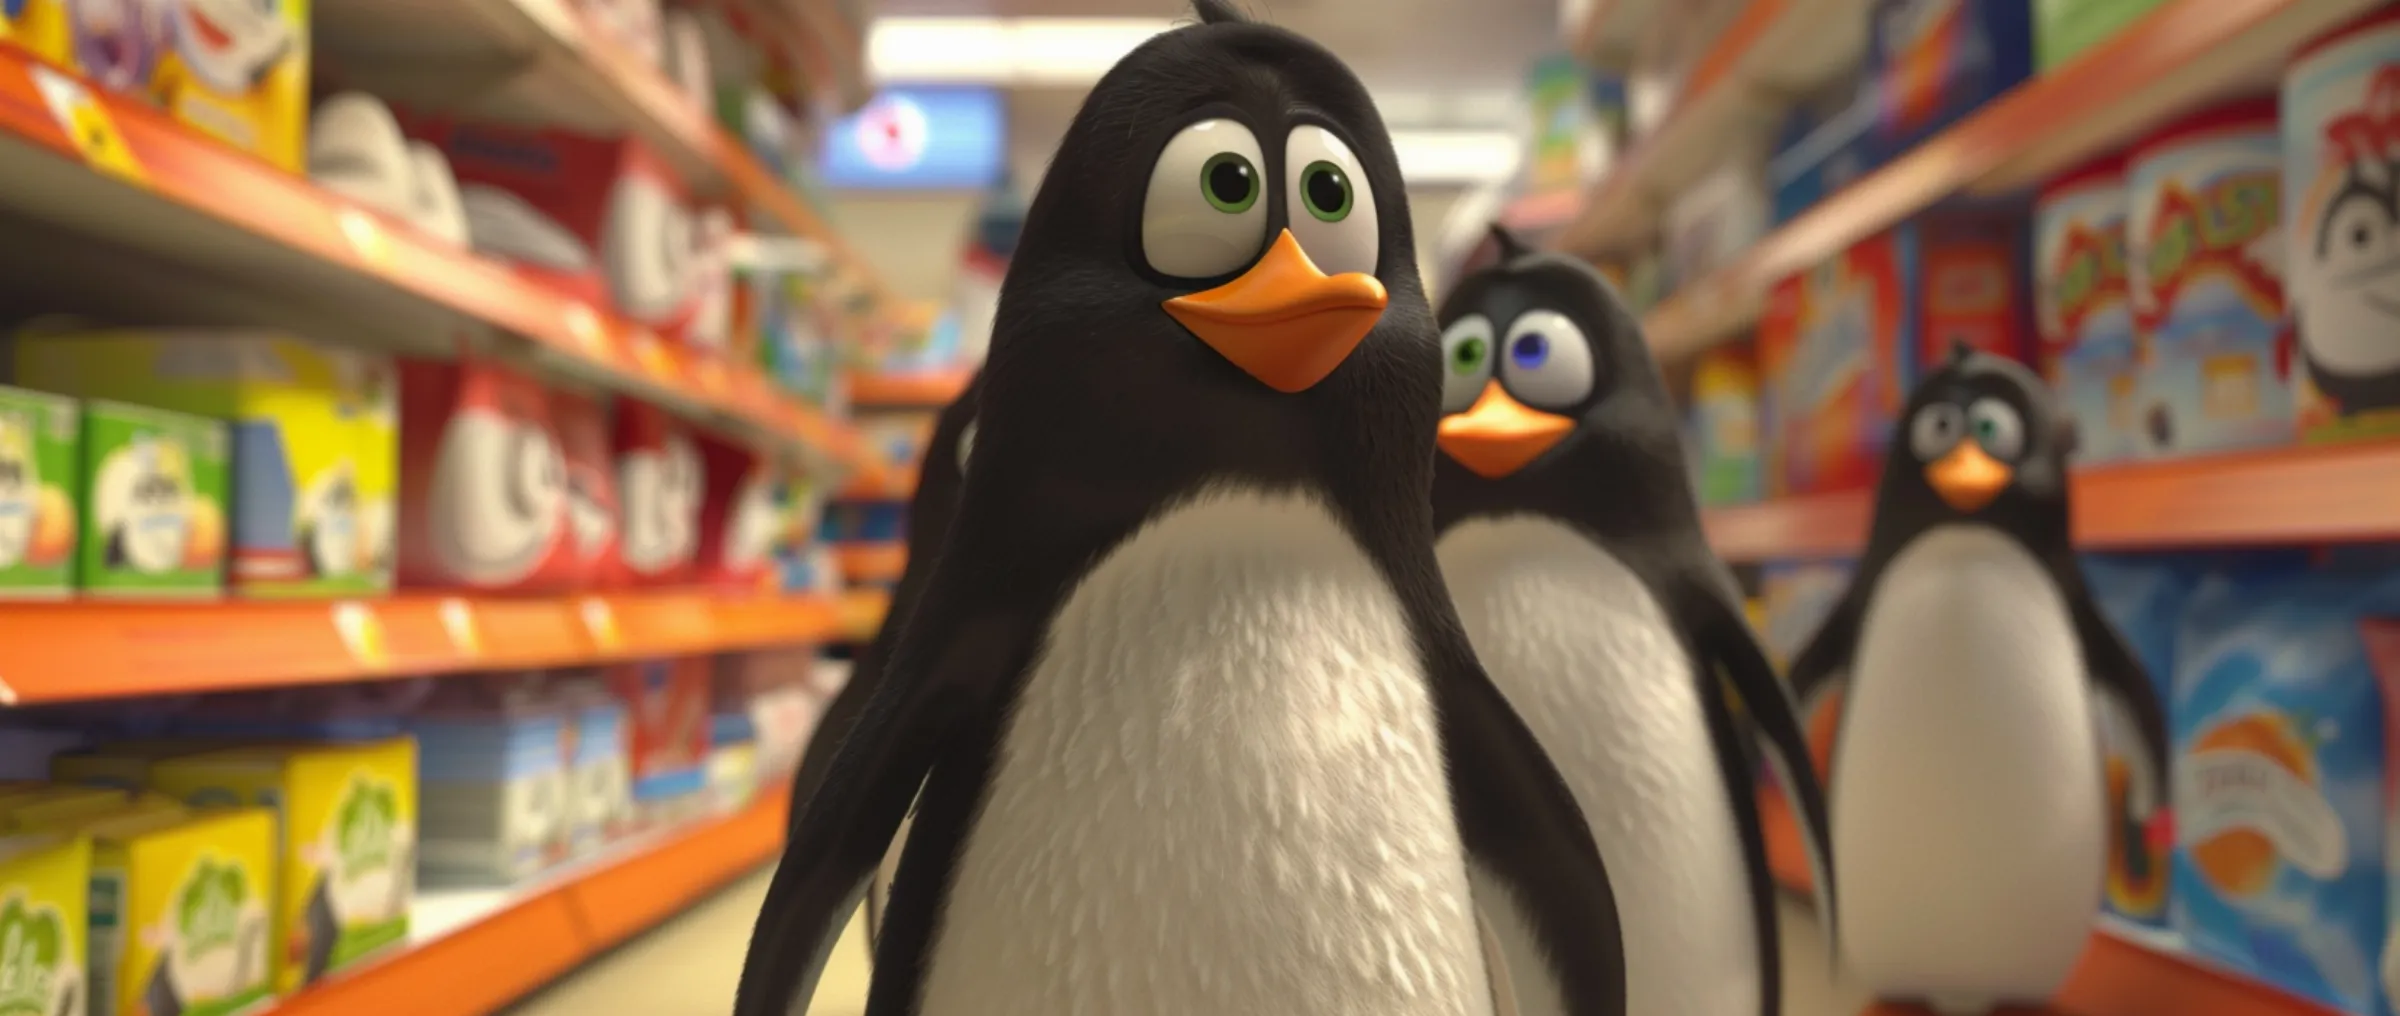 Walmart to launch sales of Pudgy Penguins toys in an additional 1,100 stores